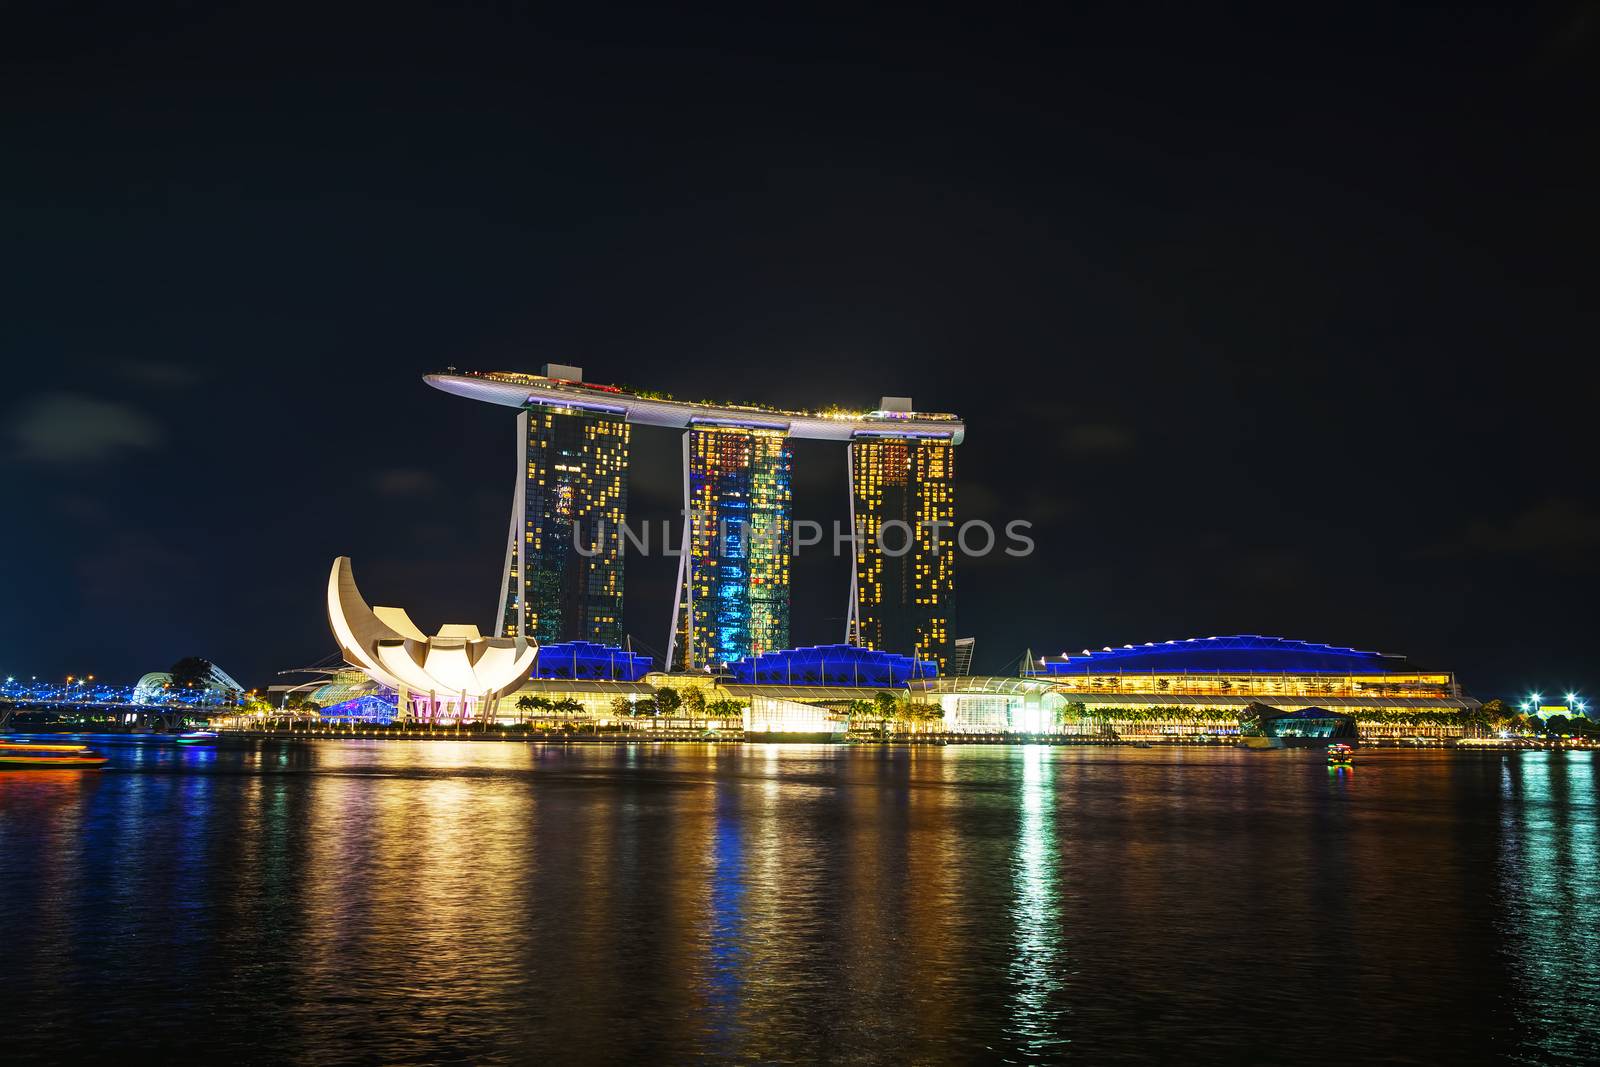 SINGAPORE - OCTOBER 30: Overview of the marina bay with Marina Bay Sands on October 30, 2015 in Singapore.